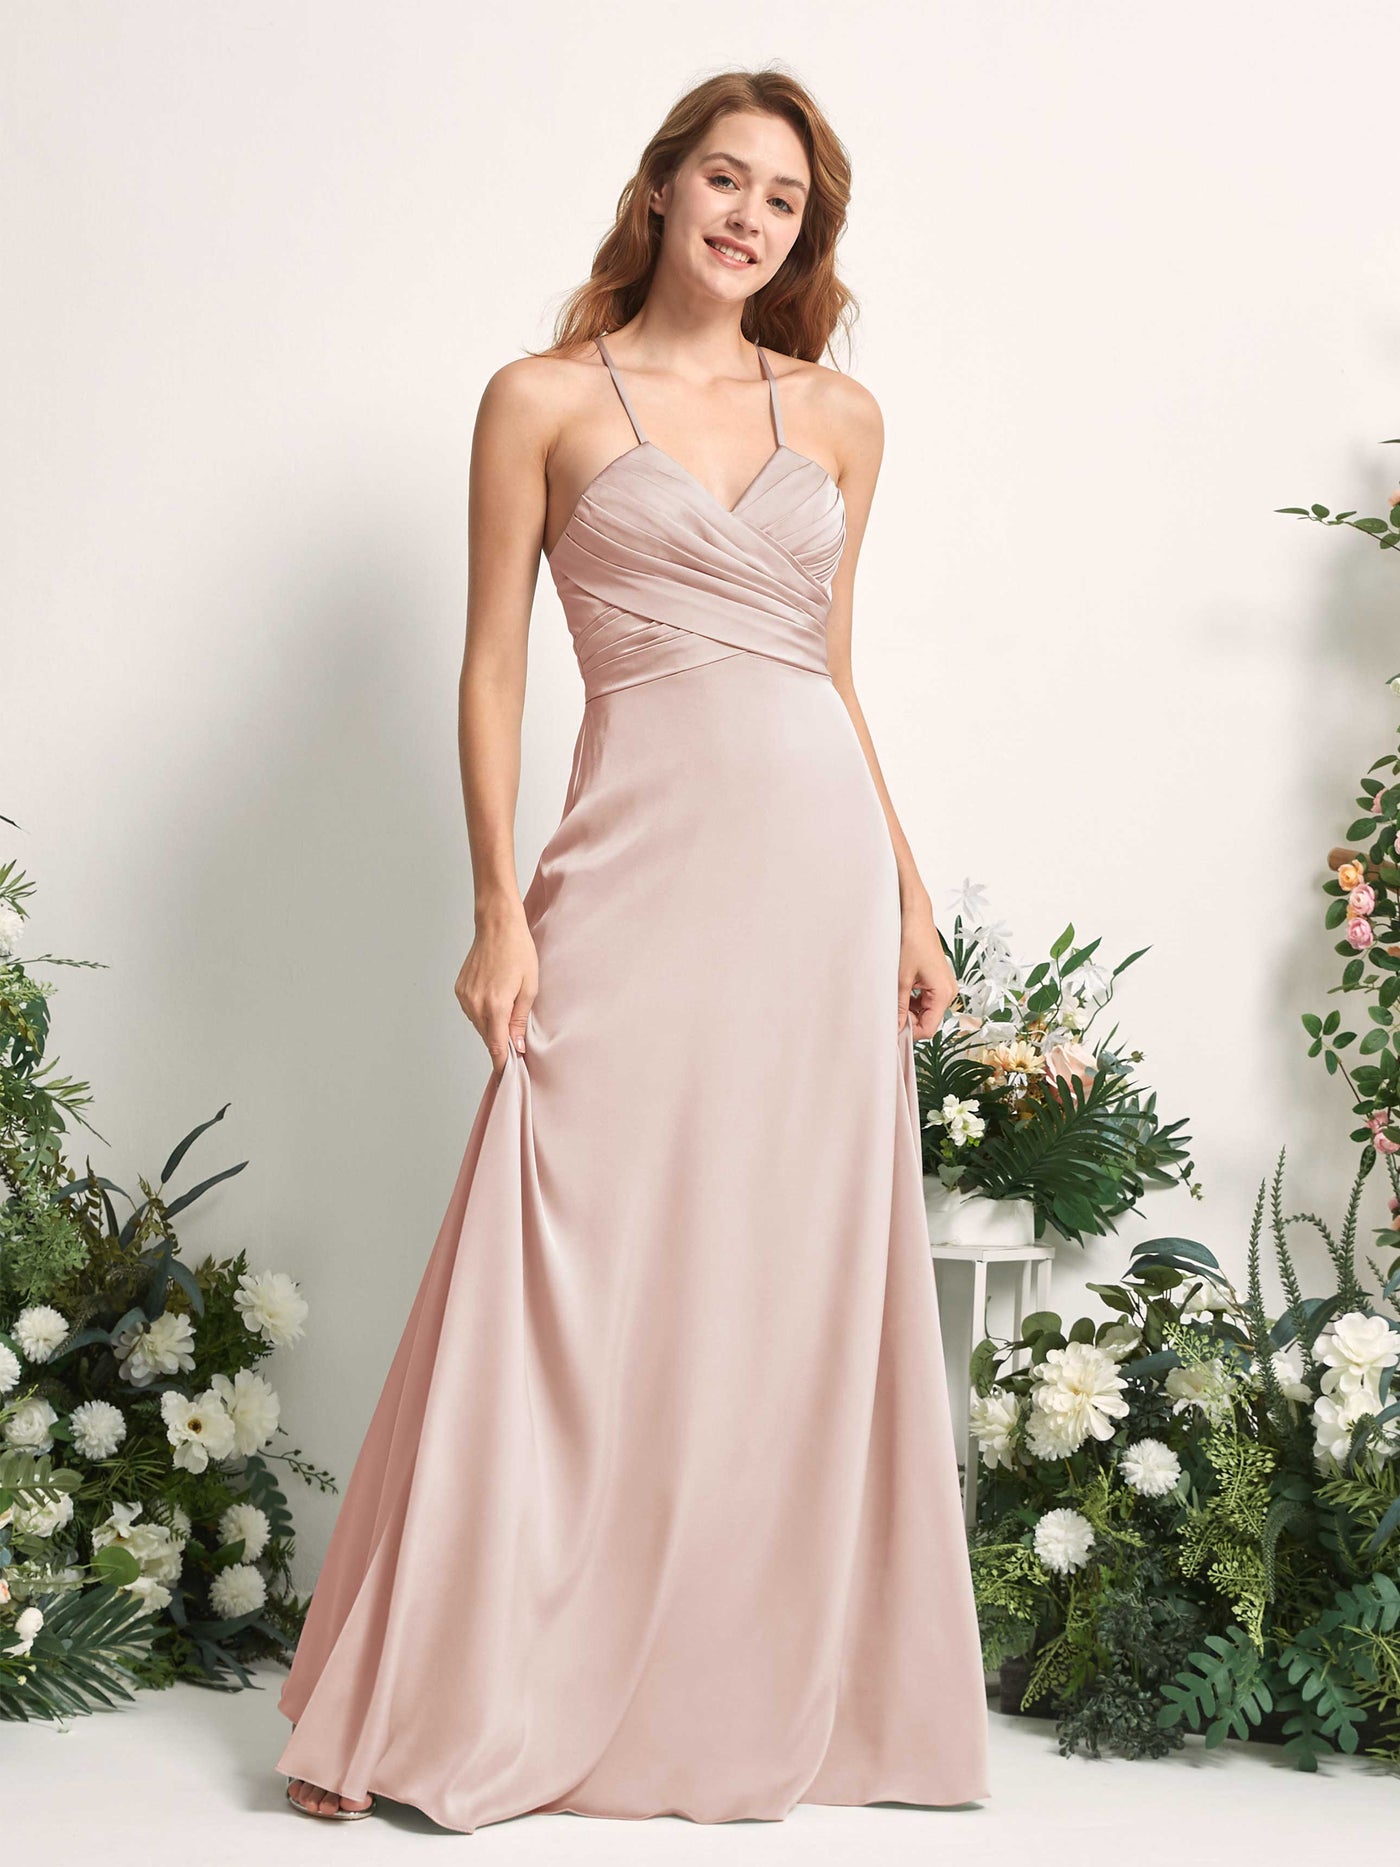 Pearl Pink Bridesmaid Dresses Bridesmaid Dress A-line Satin Spaghetti-straps Full Length Sleeveless Wedding Party Dress (80225710)#color_pearl-pink